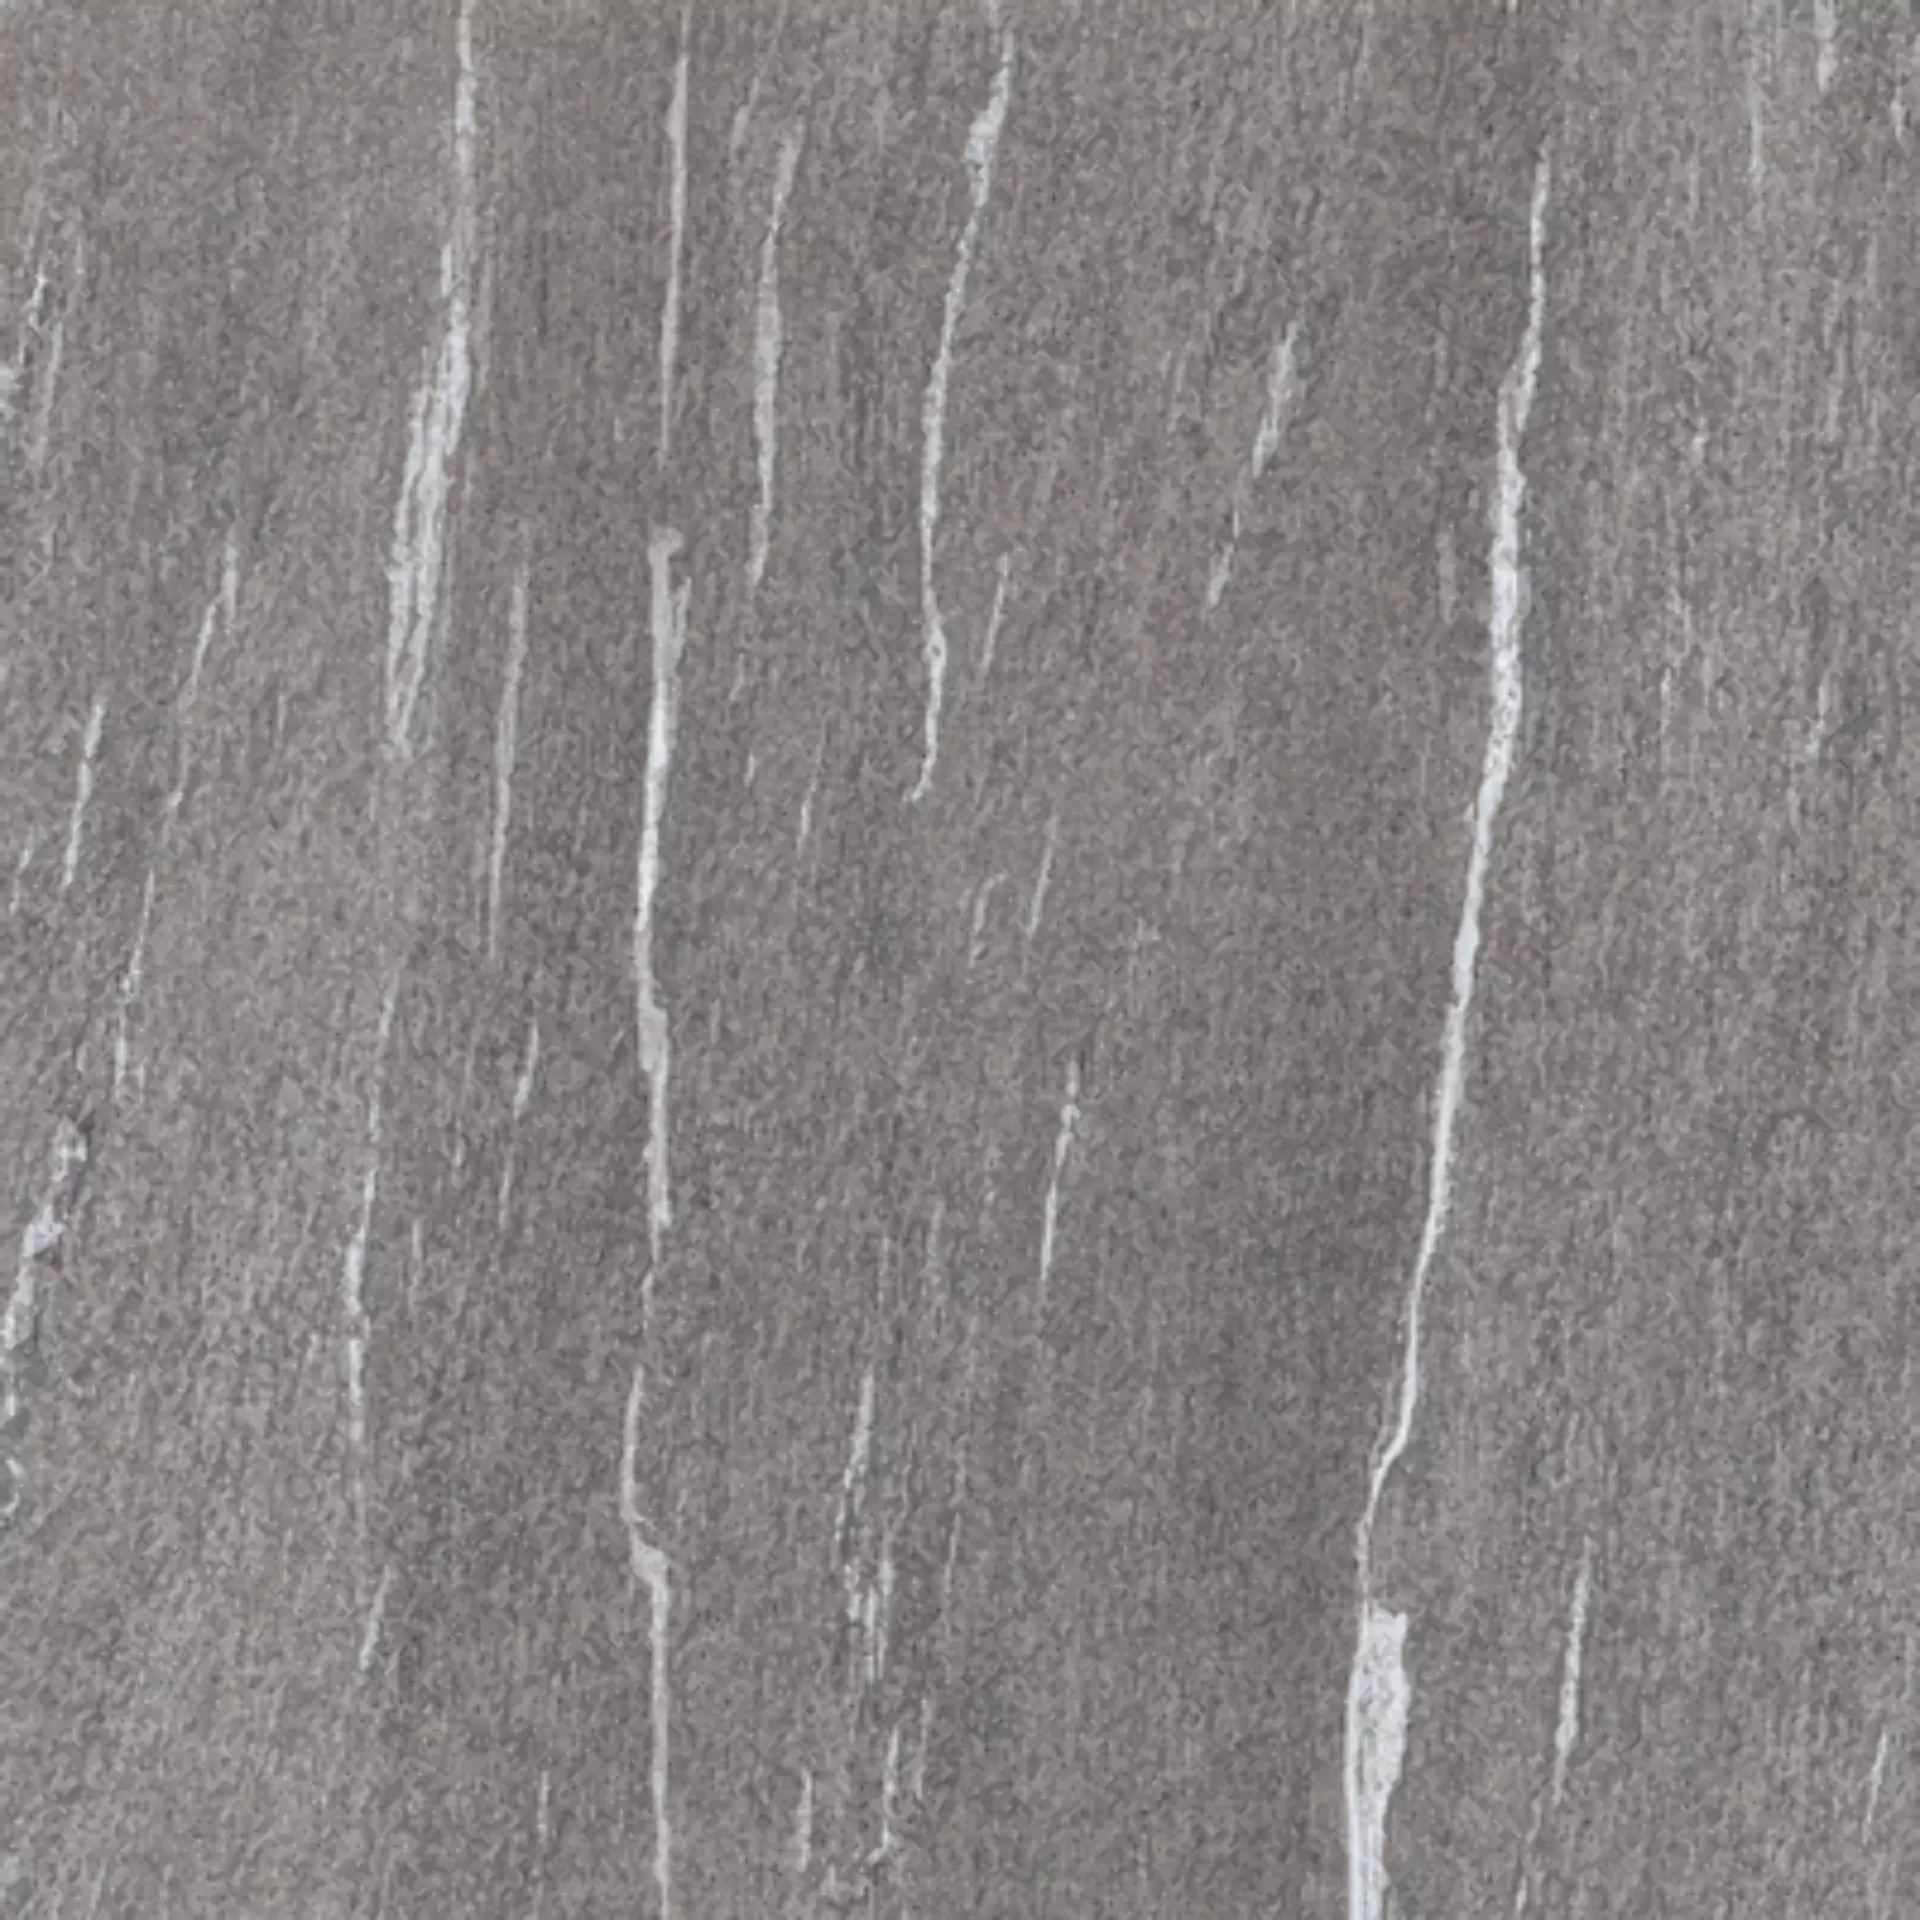 Keope Swisstone Anthracite Strutturato 46425731 60x60cm rectified 20mm